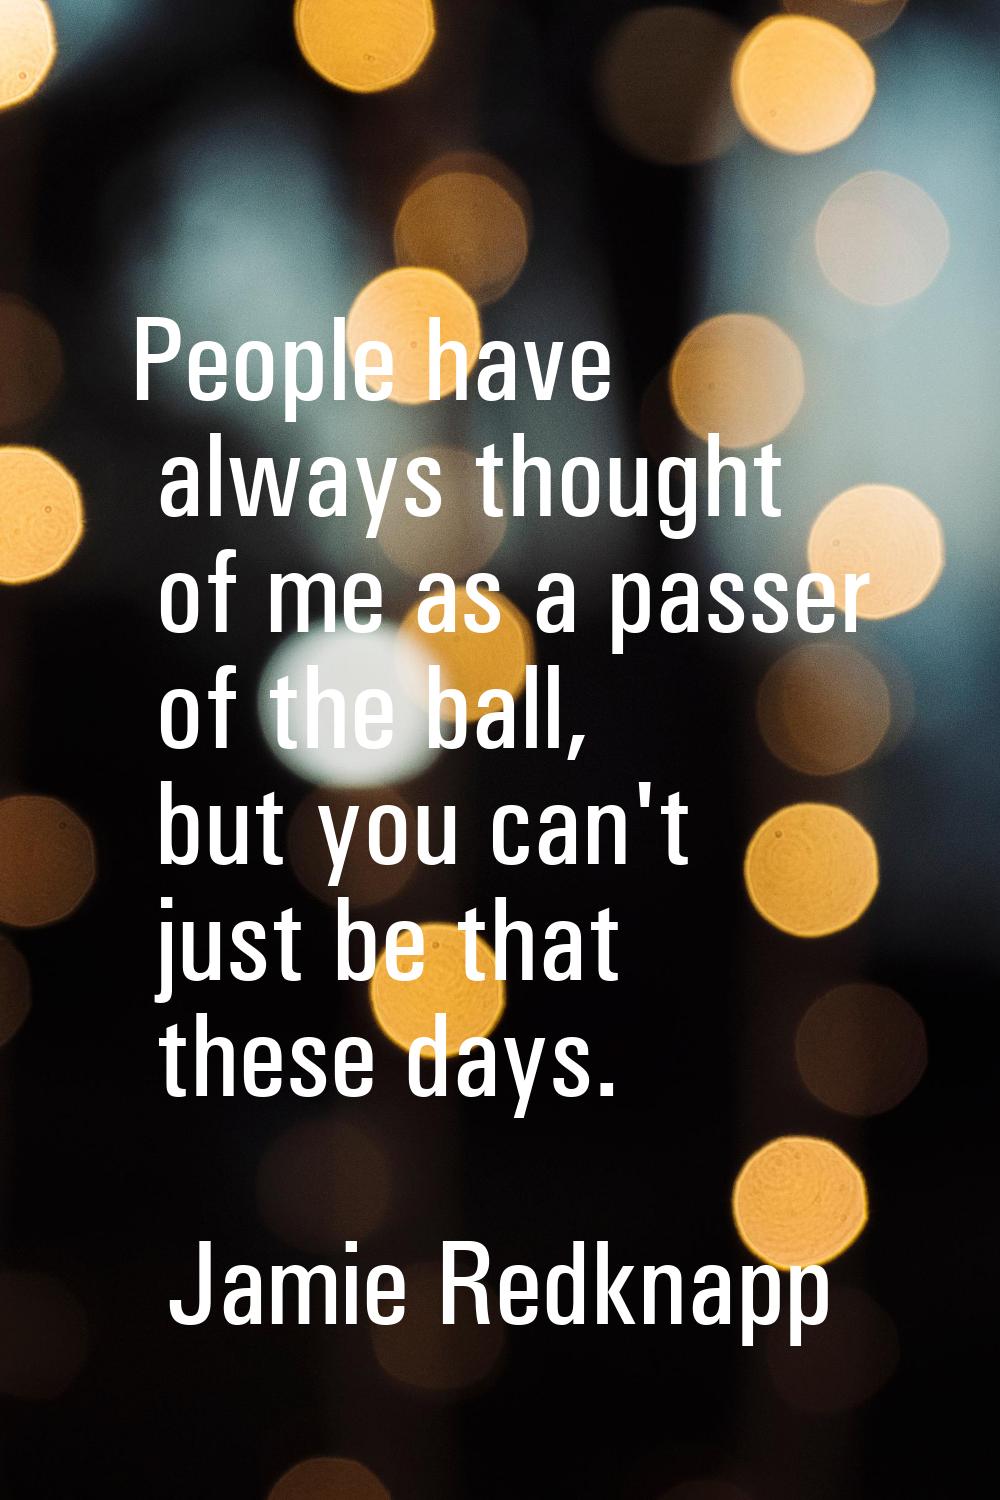 People have always thought of me as a passer of the ball, but you can't just be that these days.